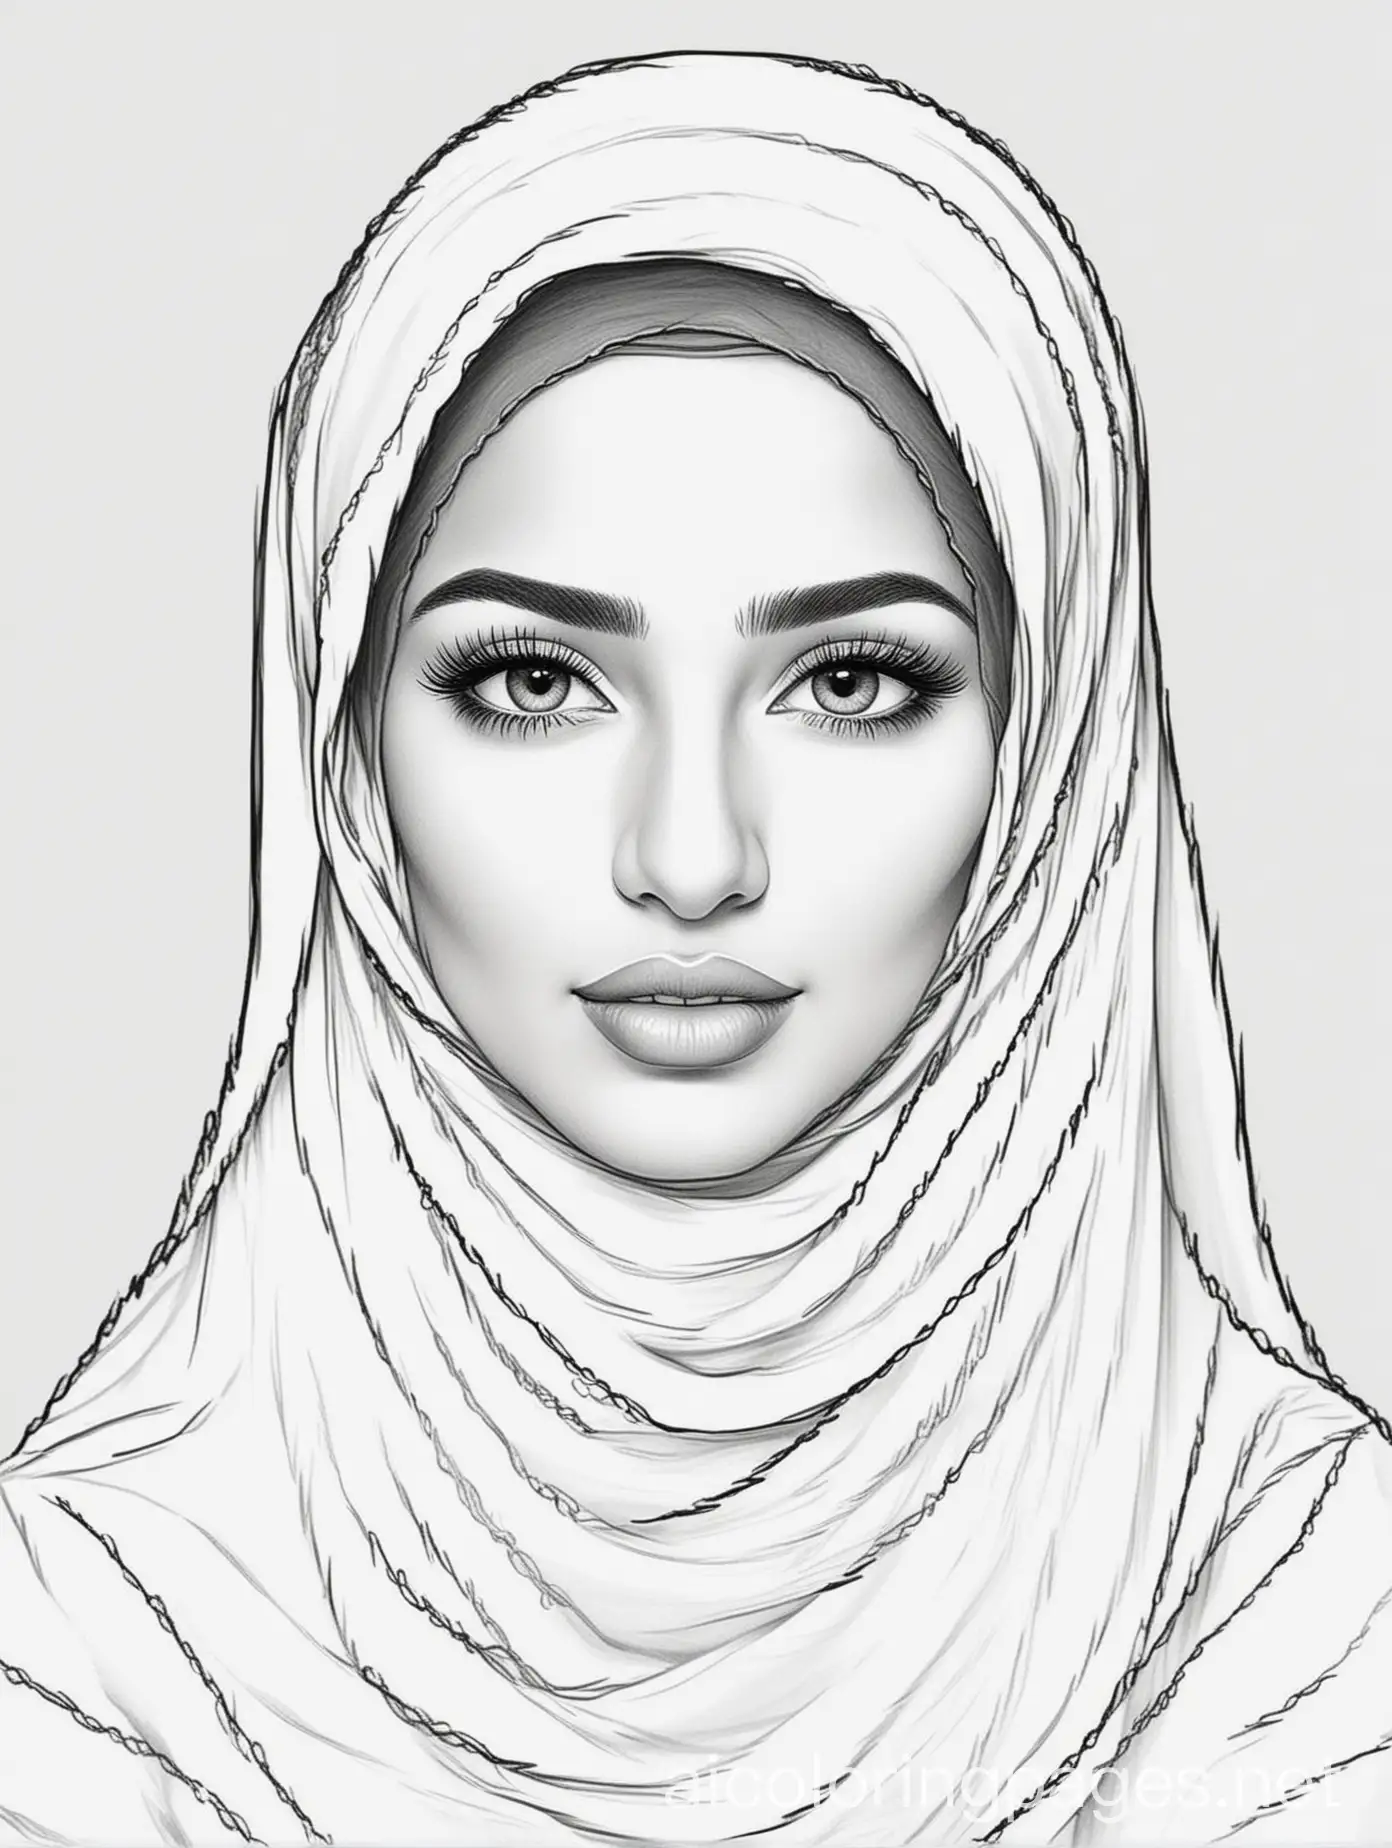 A beautiful Arab Muslim woman wearing a veil, Coloring Page, black and white, line art, white background, Simplicity, Ample White Space. The background of the coloring page is plain white to make it easy for young children to color within the lines. The outlines of all the subjects are easy to distinguish, making it simple for kids to color without too much difficulty